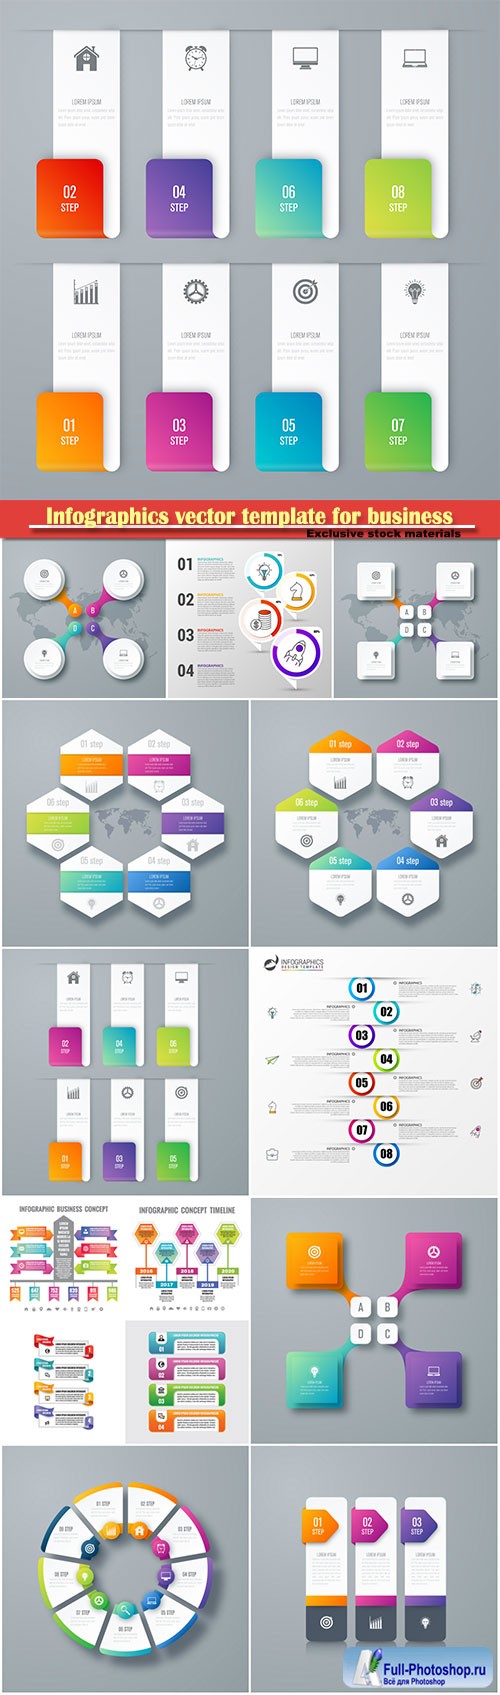 Infographics vector template for business presentations or information banner # 61